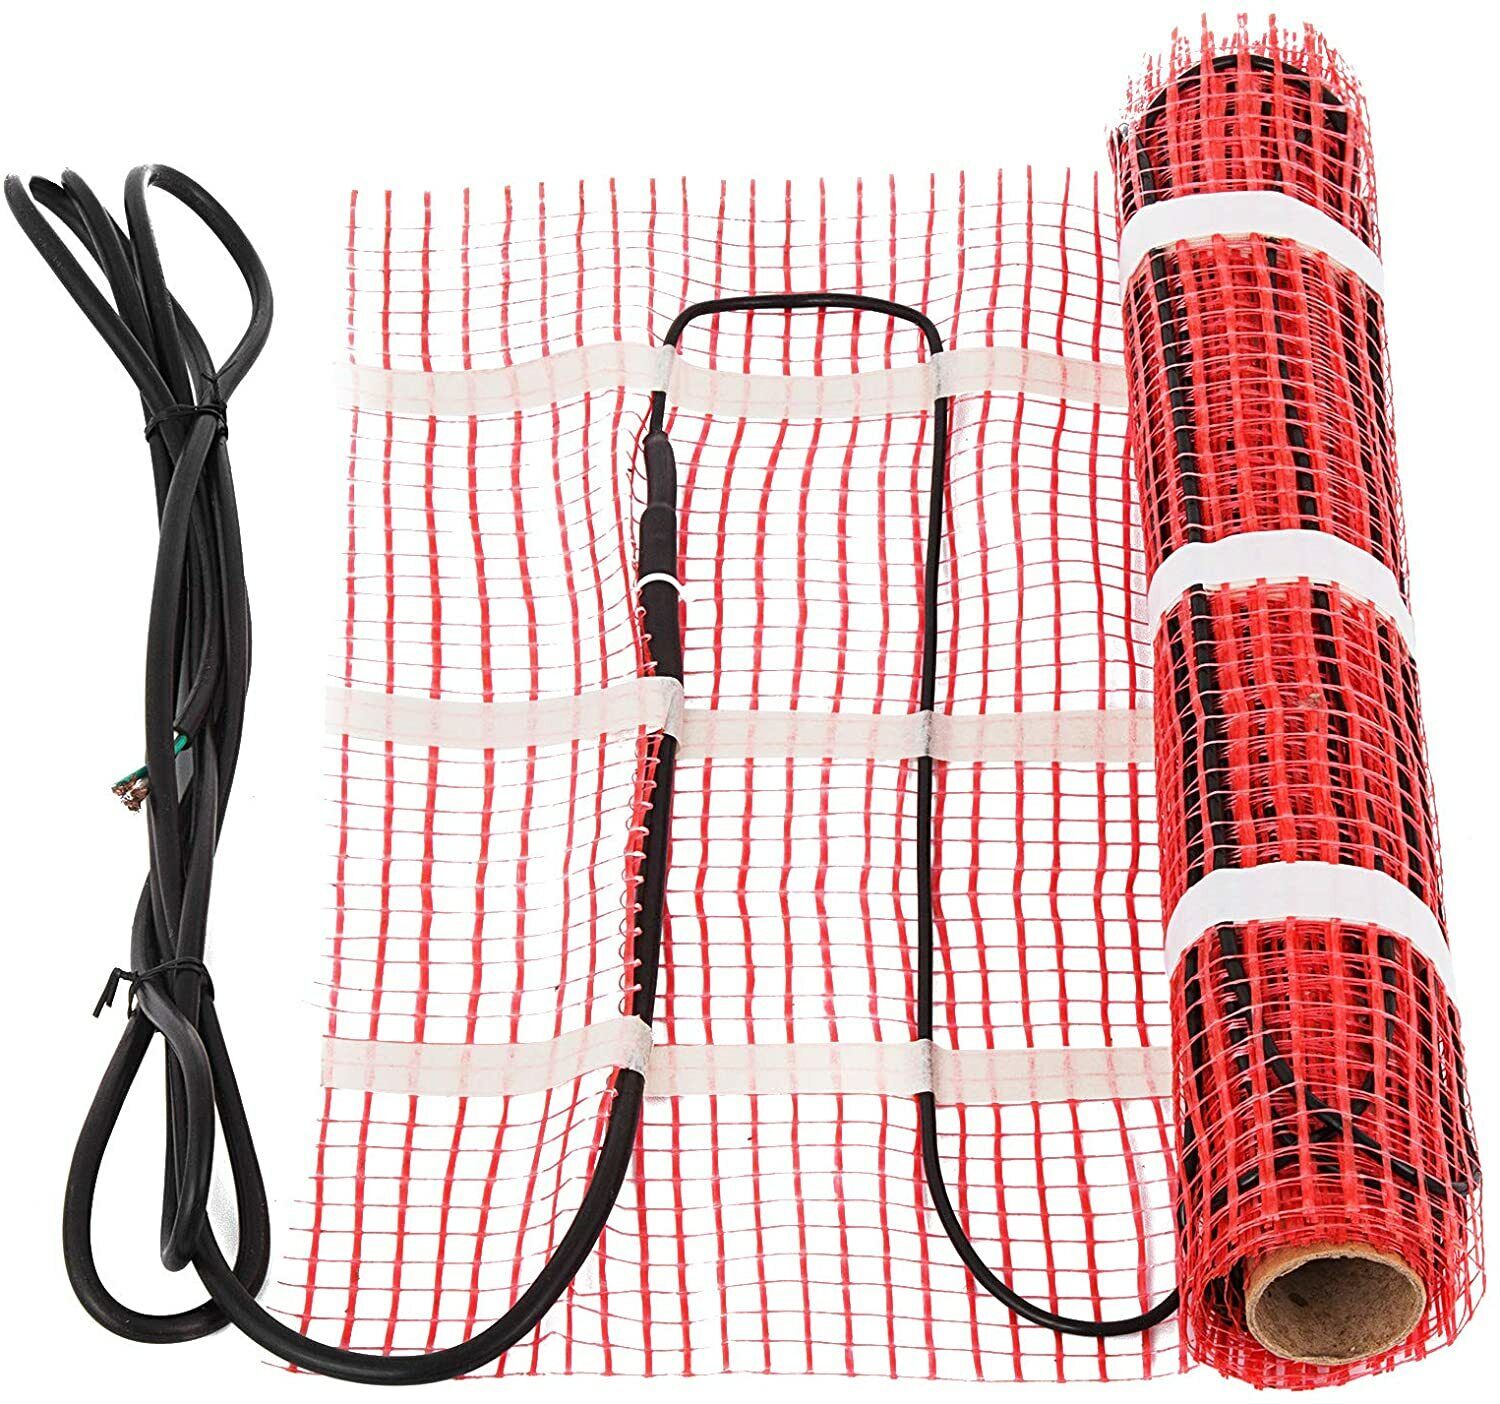 30 Sqft 120V Electric Radiant Floor HeatingMat with Alarmer and